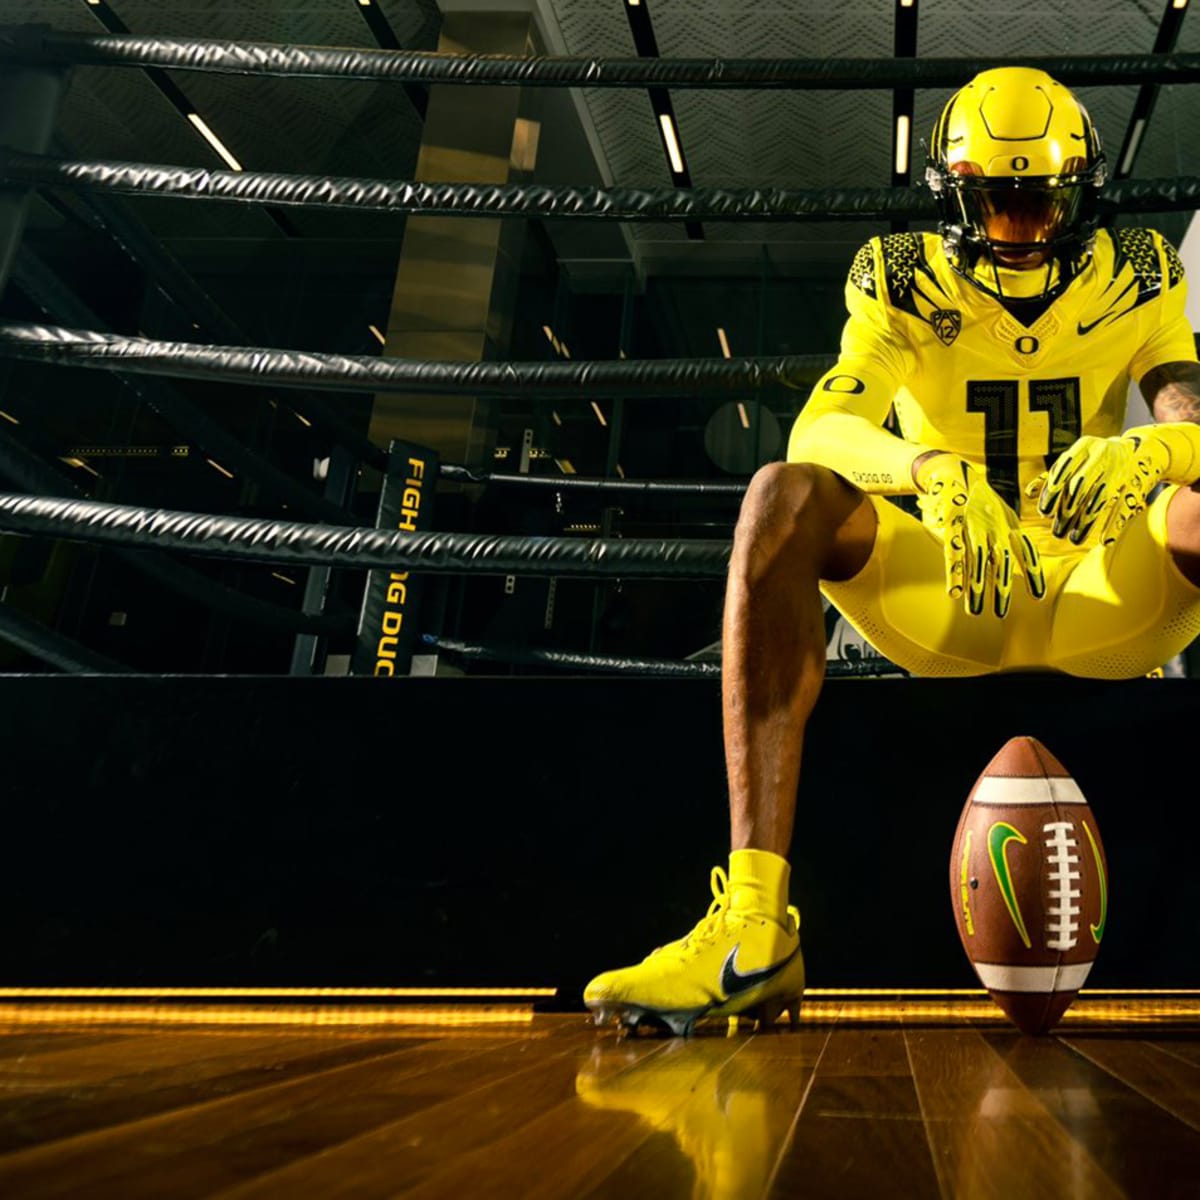 Oregon Football Releases Green and Black Uniform Combination for